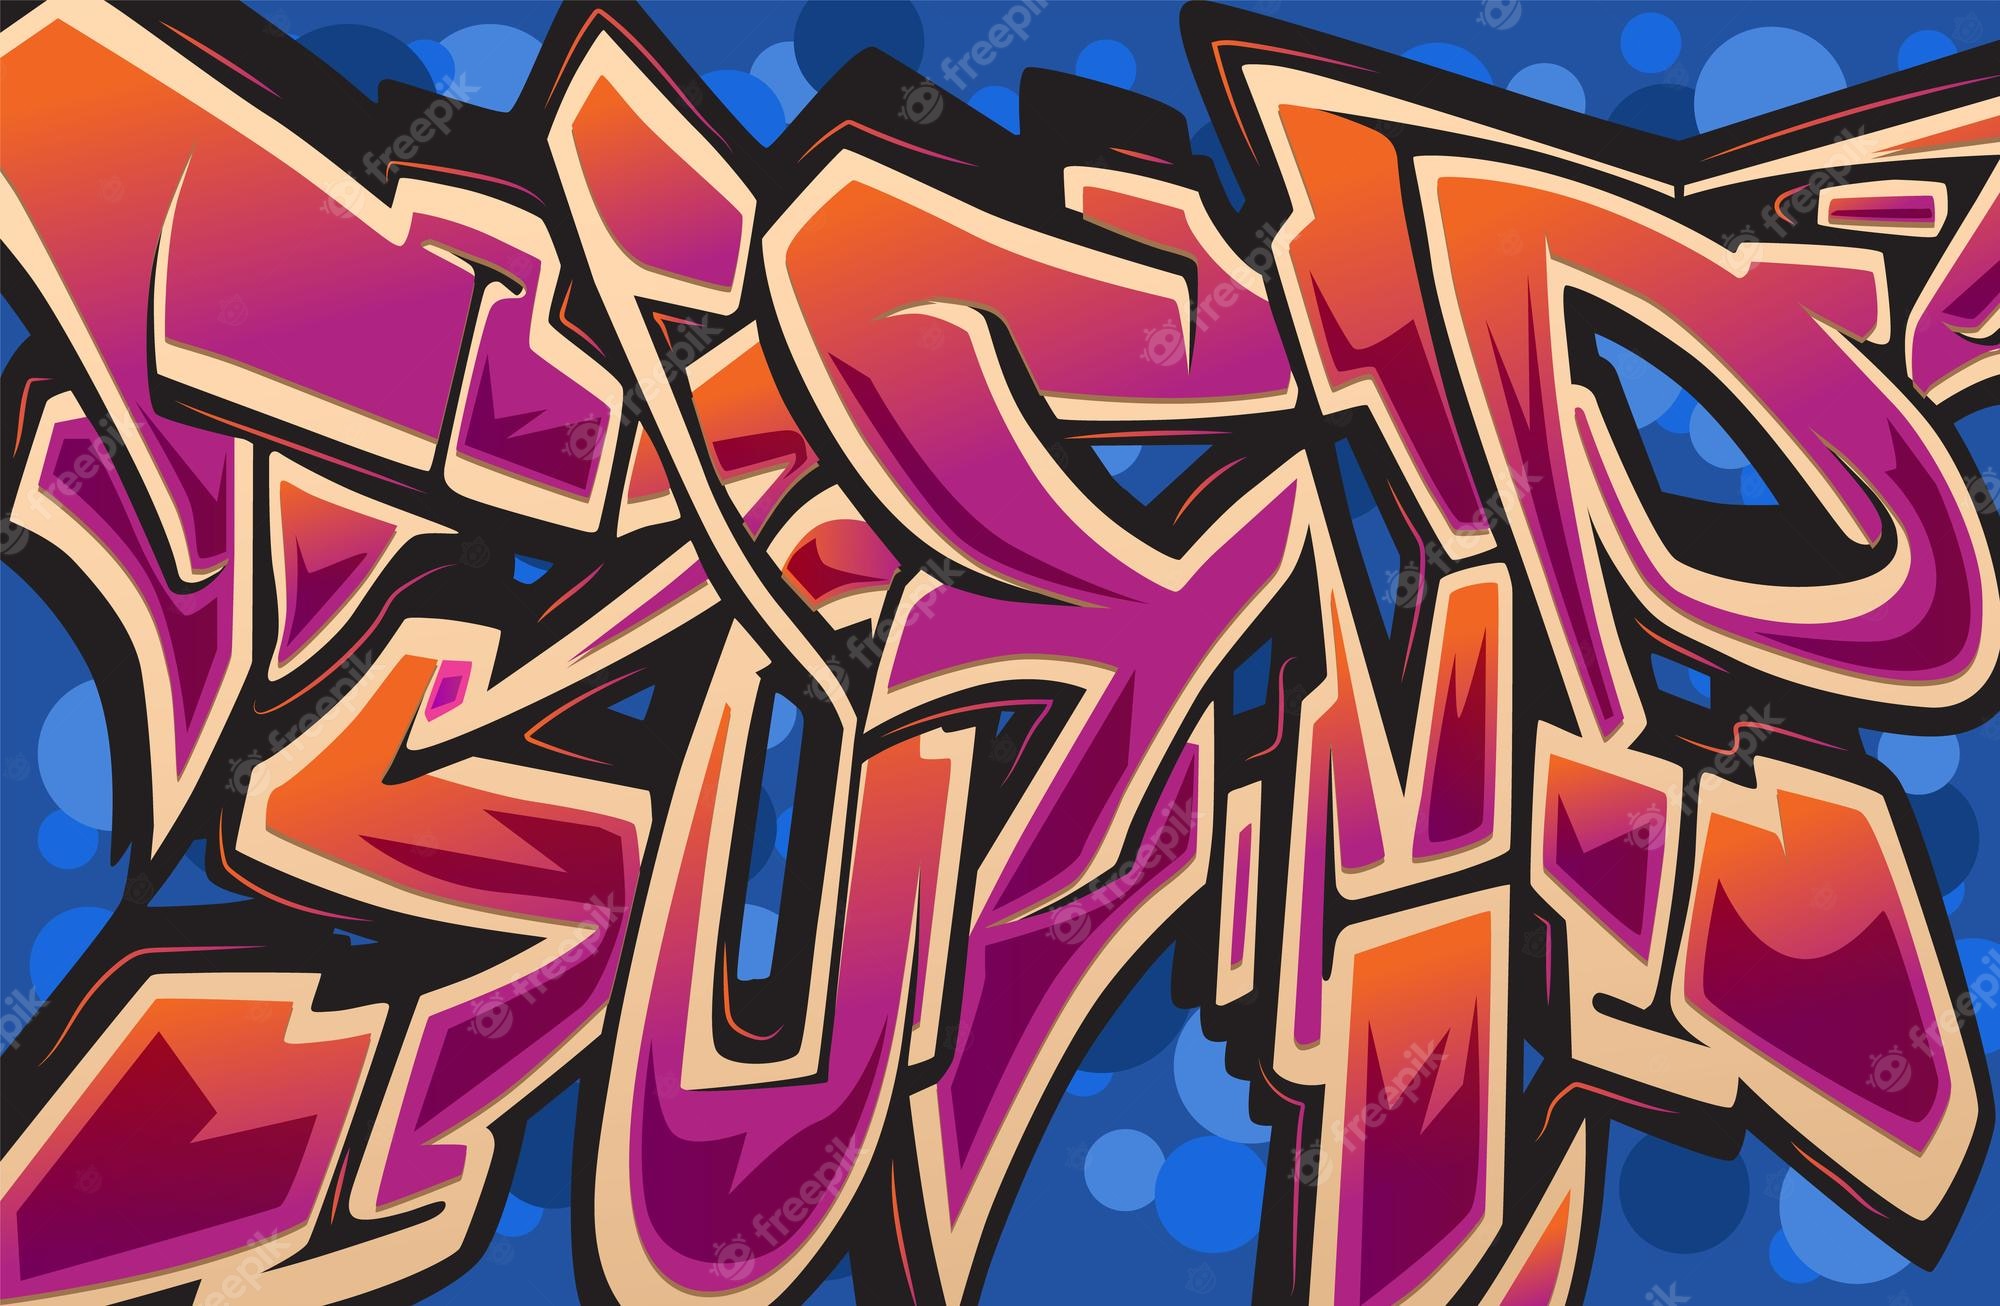 Page graffiti culture vectors illustrations for free download